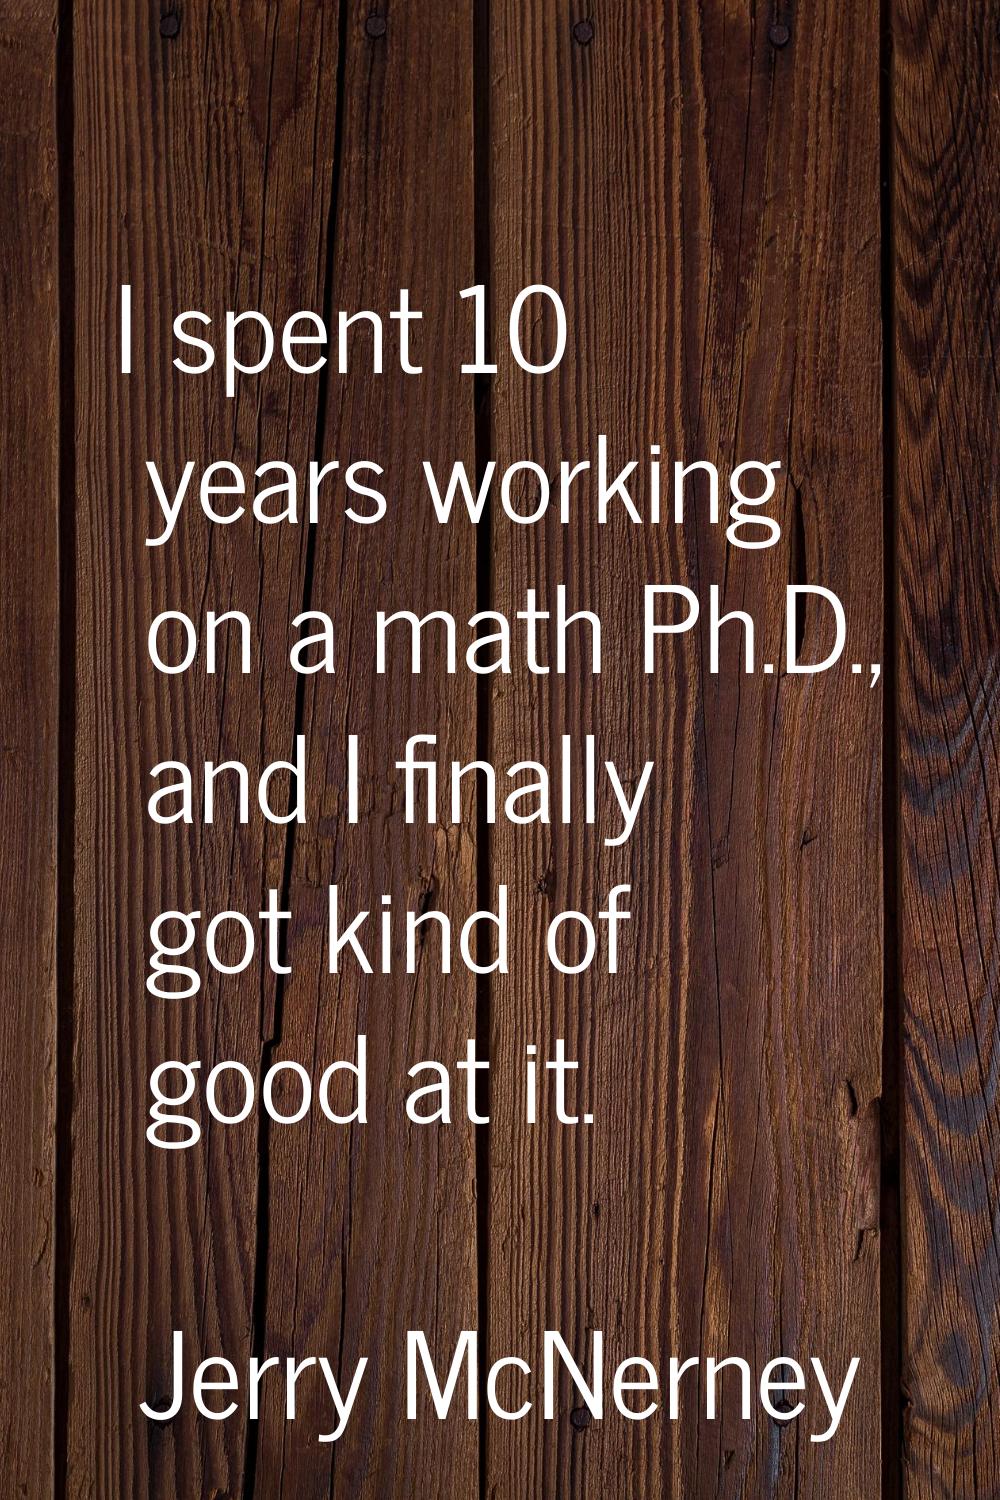 I spent 10 years working on a math Ph.D., and I finally got kind of good at it.